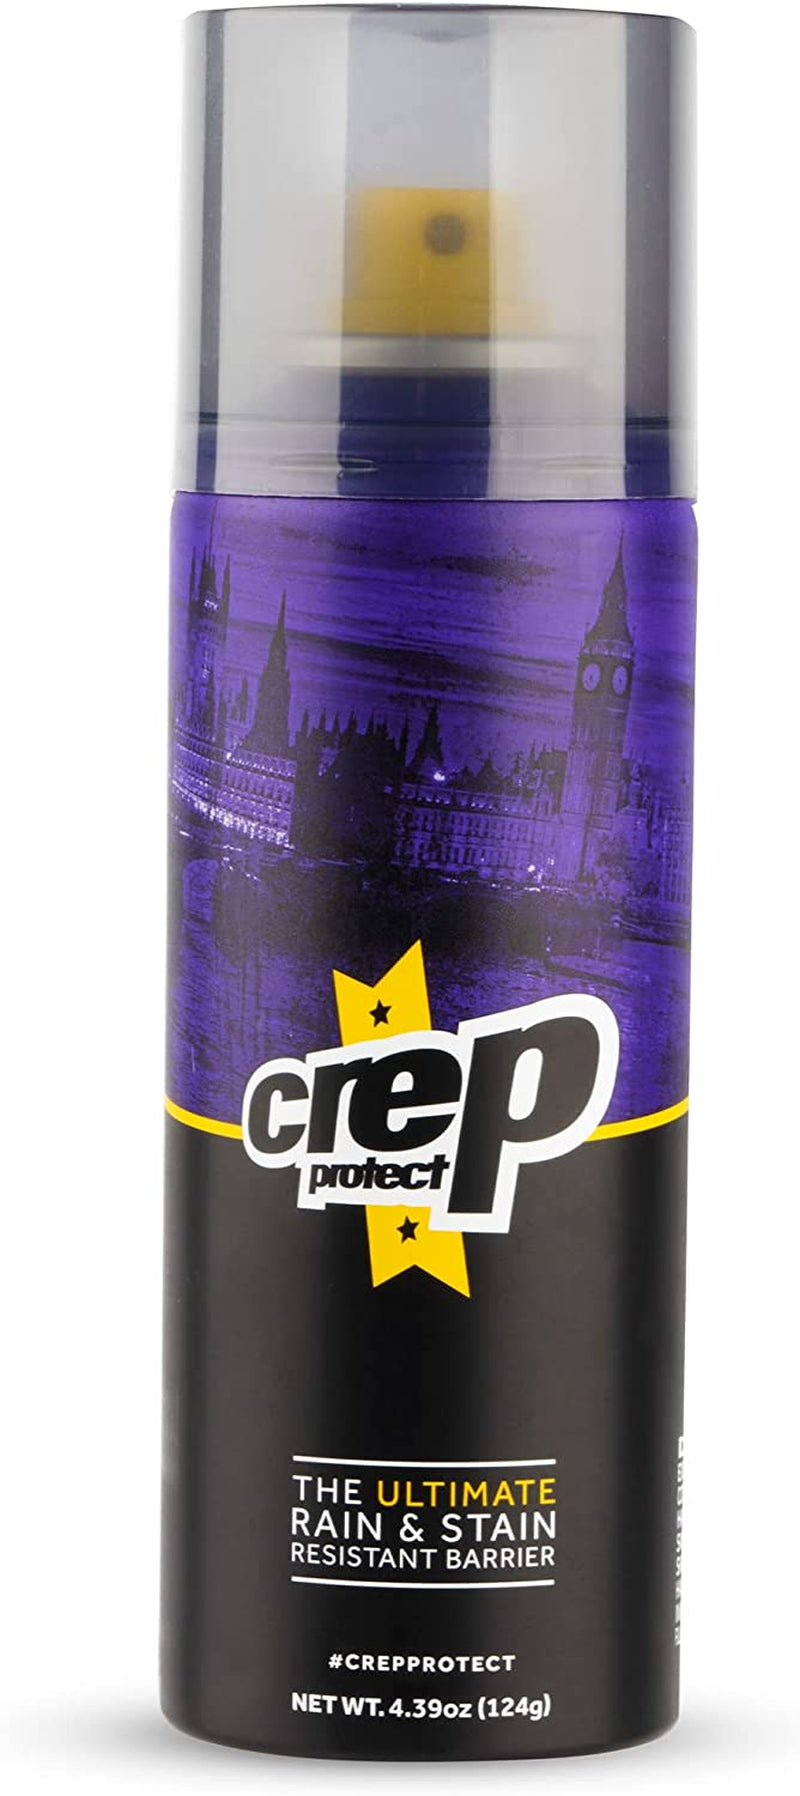 Crep Protect Shoe Protector Spray - 4.39Oz (124G) Rain & Stain Waterproof Nano Protection for Sneaker, Leather, Nubuck, Suede & Canvas